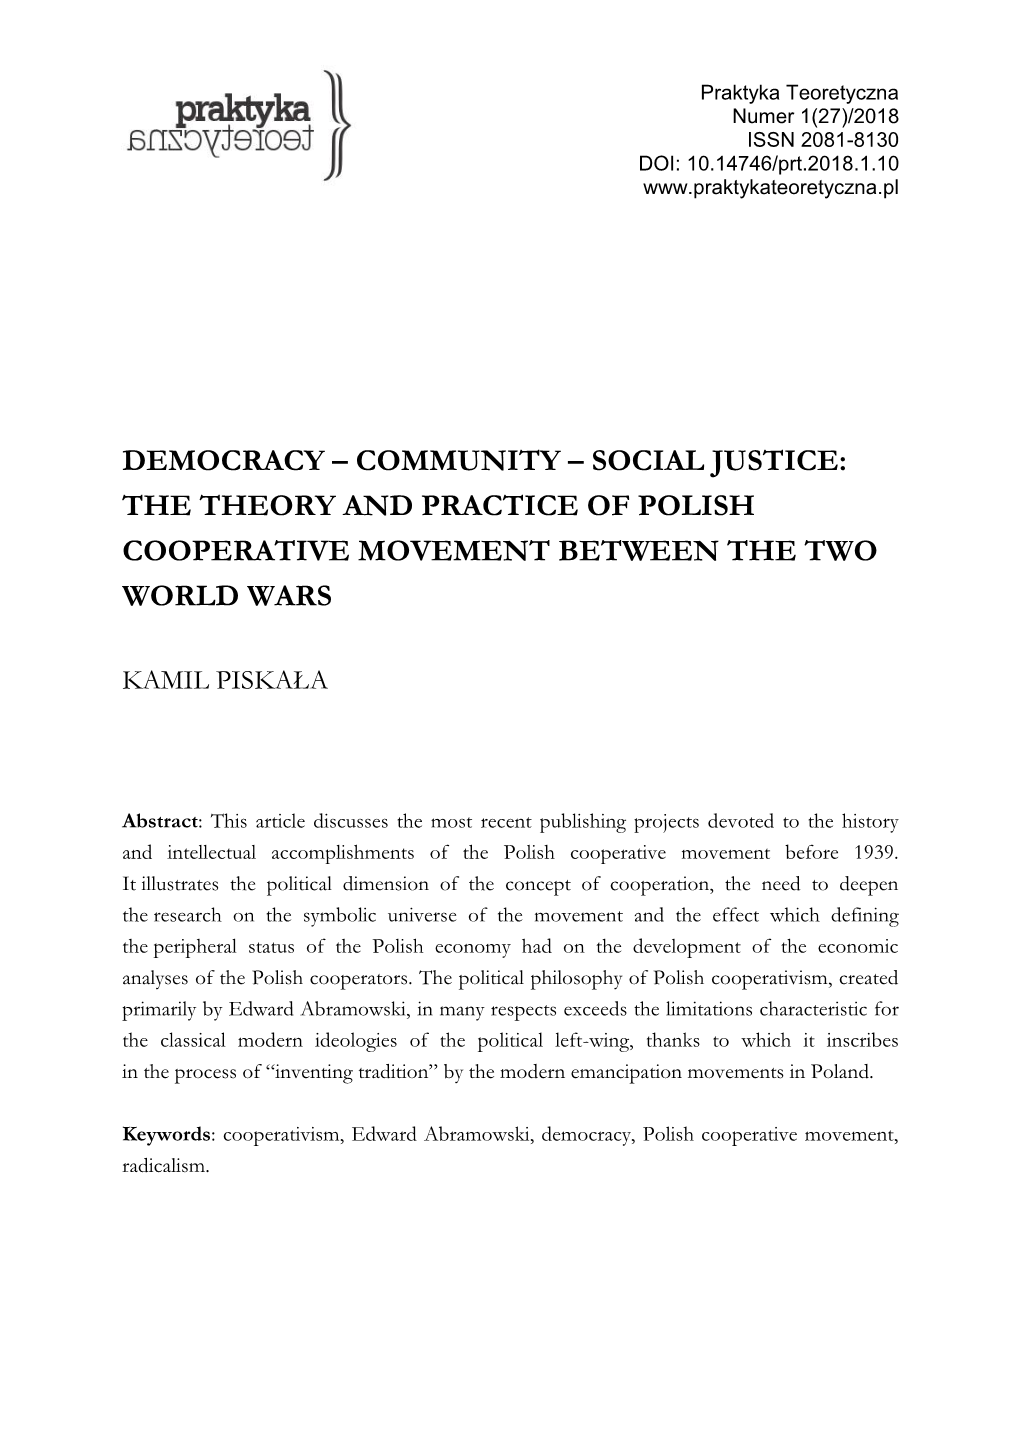 Democracy – Community – Social Justice: the Theory and Practice of Polish Cooperative Movement Between the Two World Wars